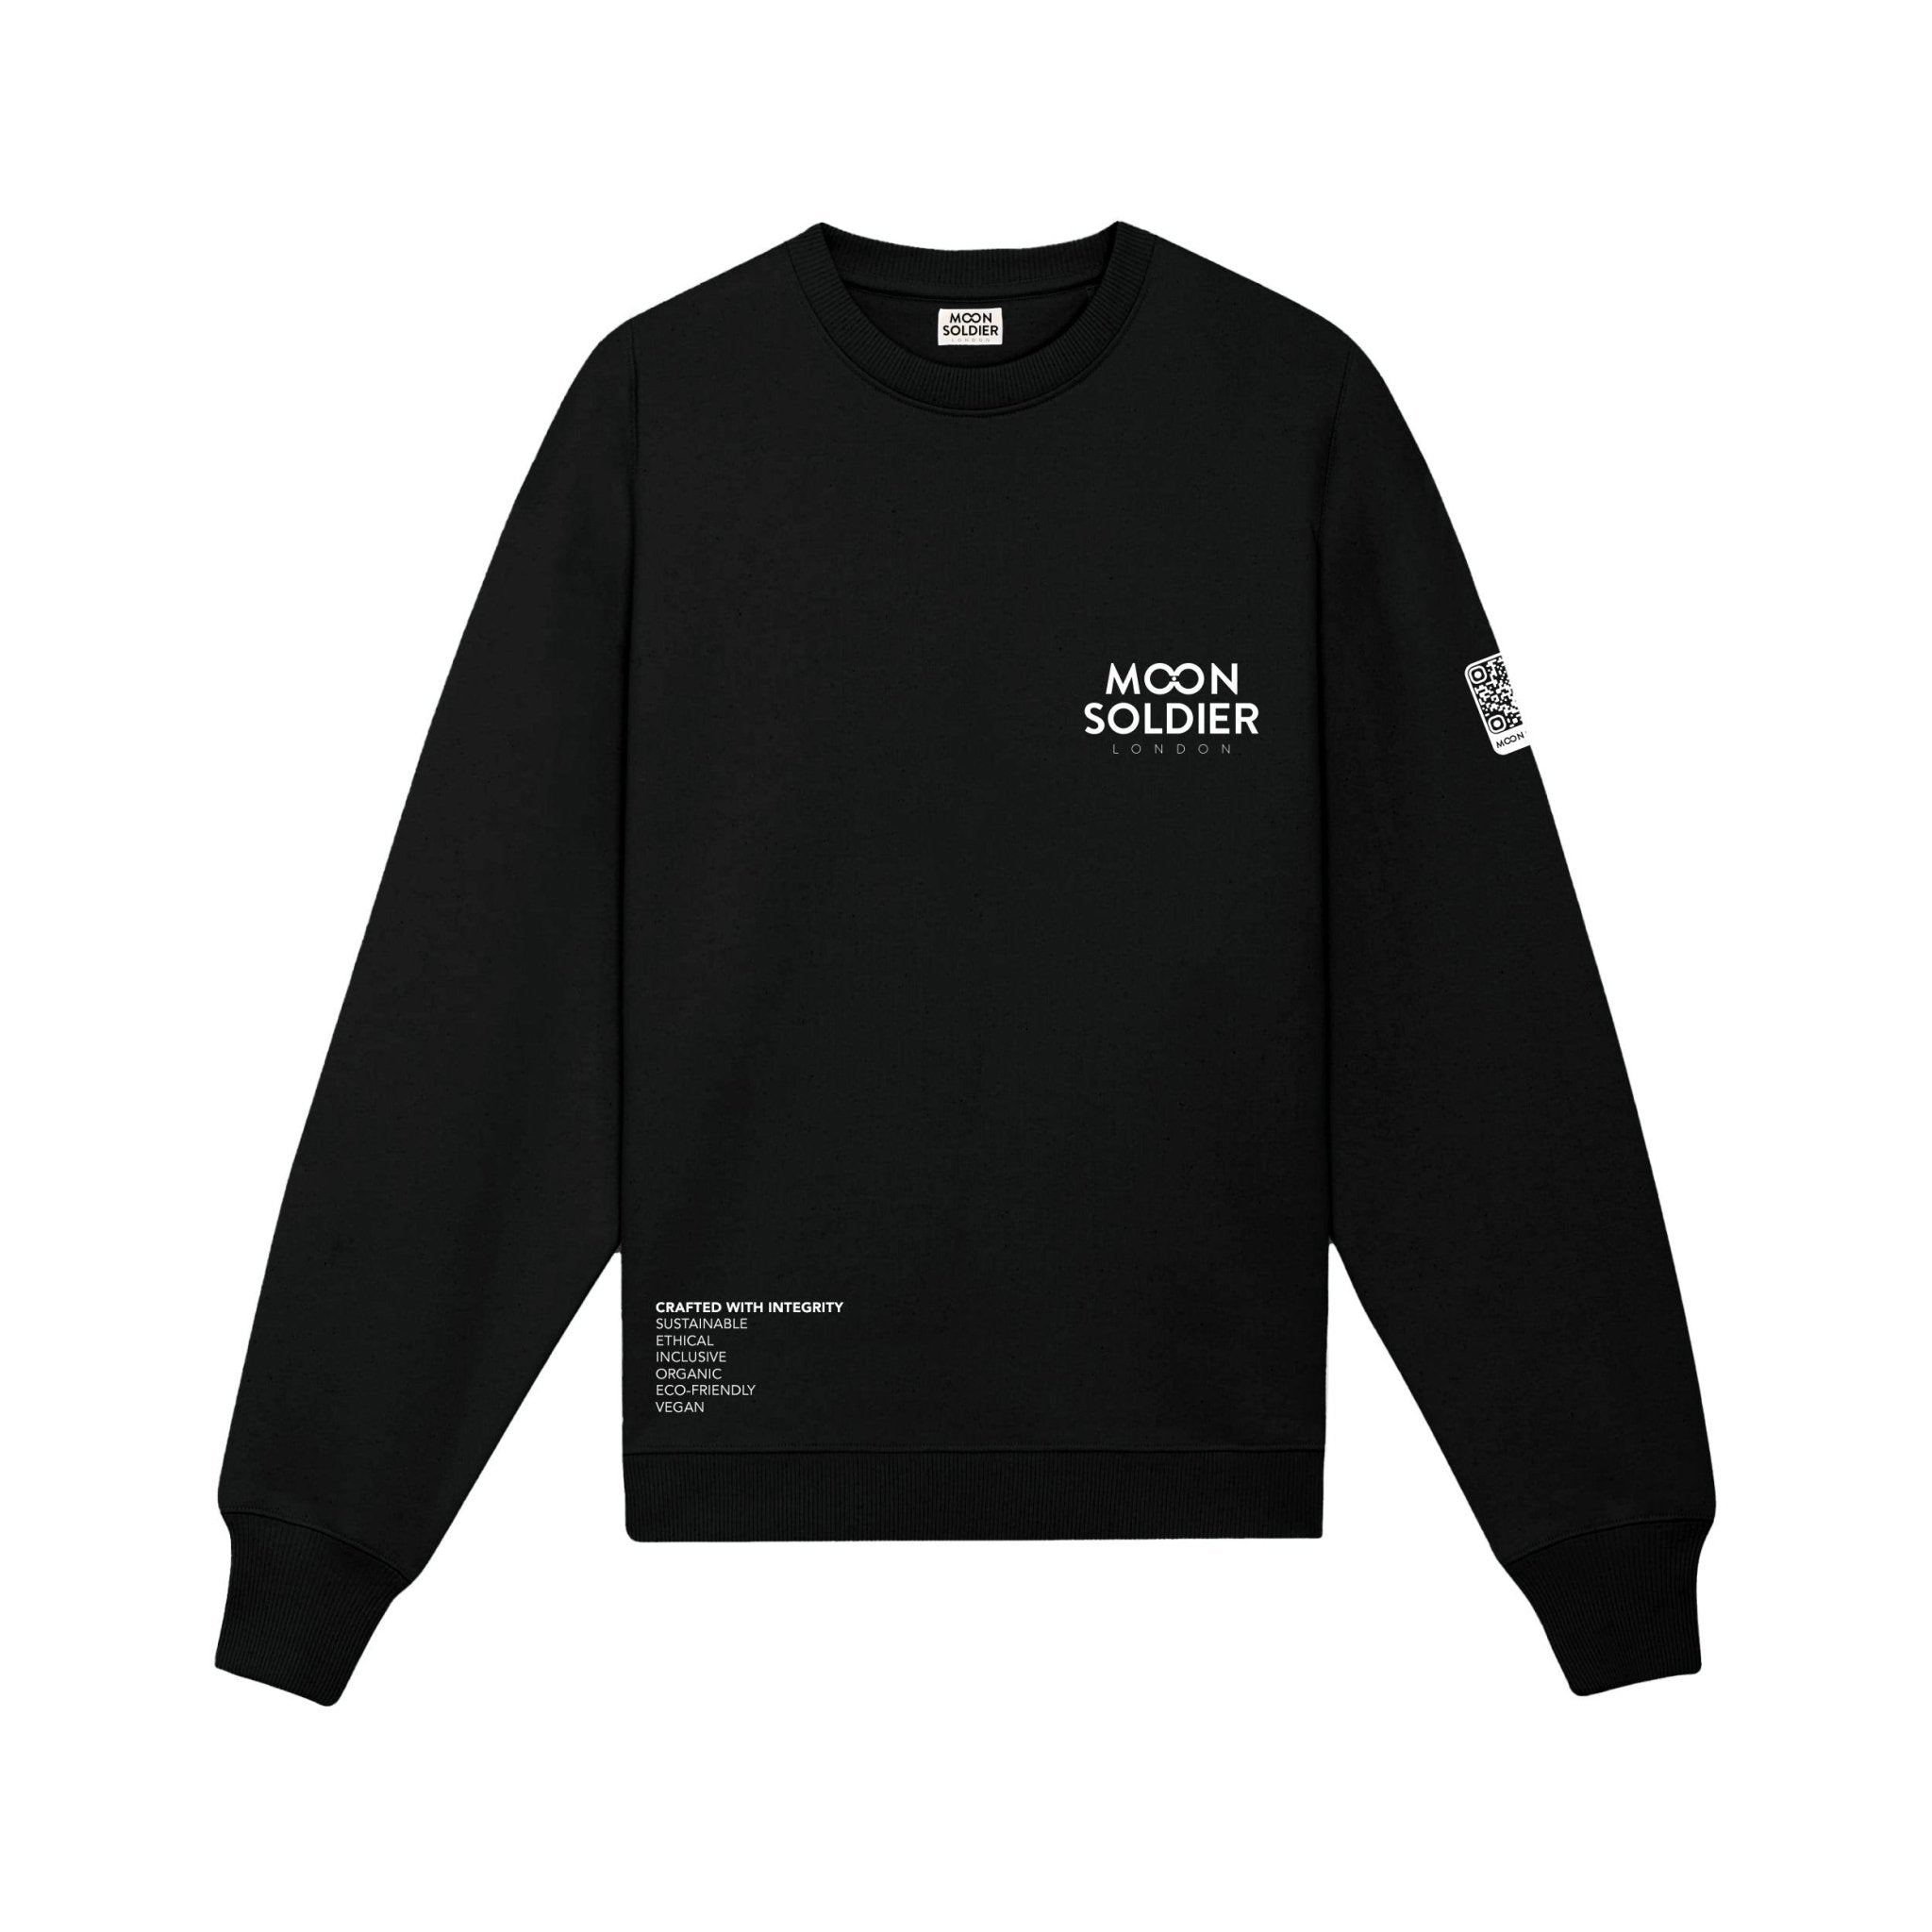 Crafted with Integrity Sweatshirt - Moon Soldier